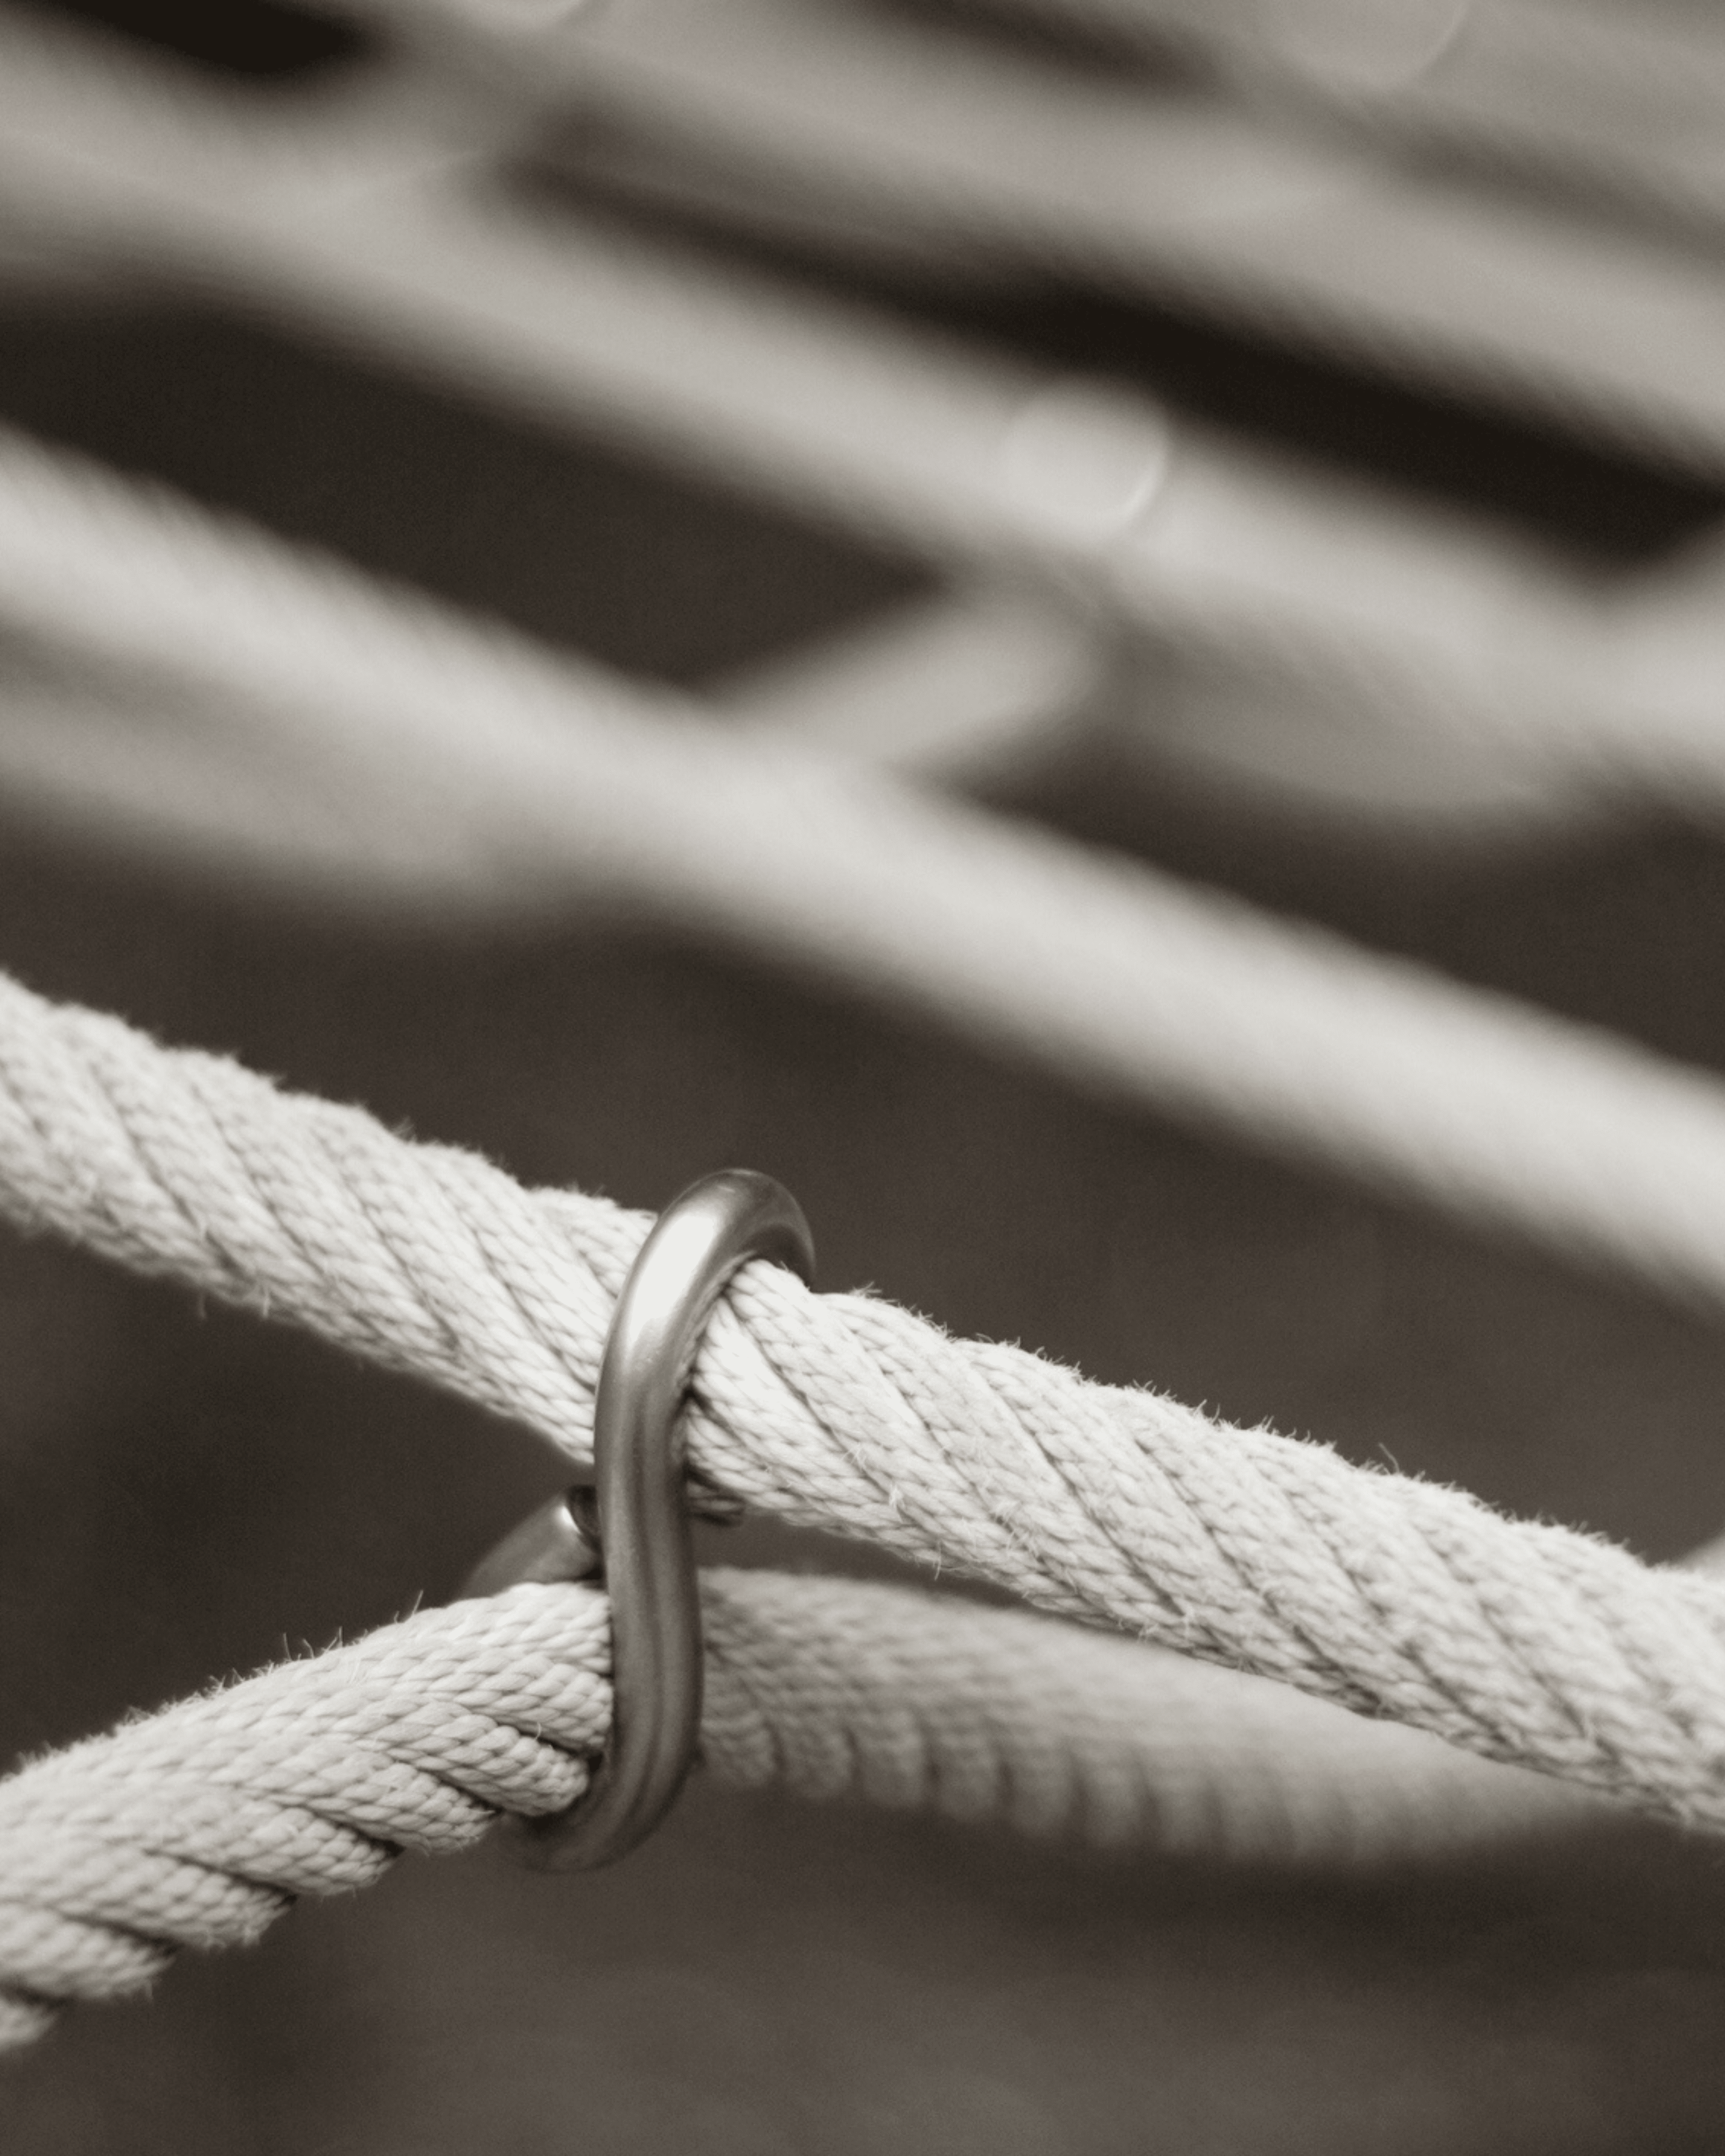 Rope connected by a metal ring